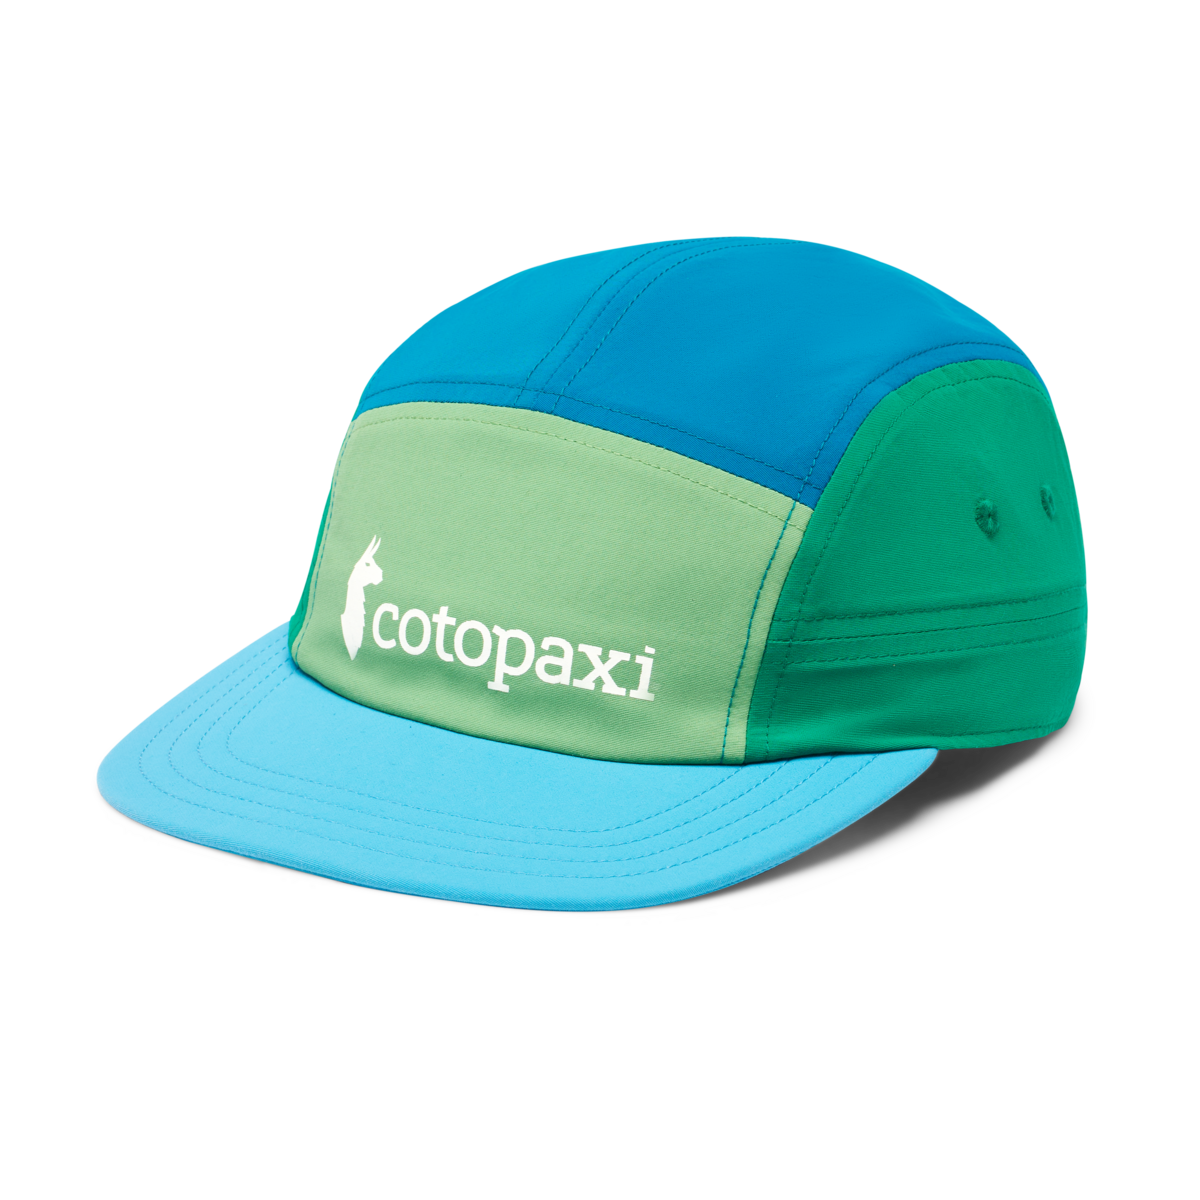 Cotopaxi • Cotopaxi Tech 5-panel Hat • Super Special Offer! Limited ...